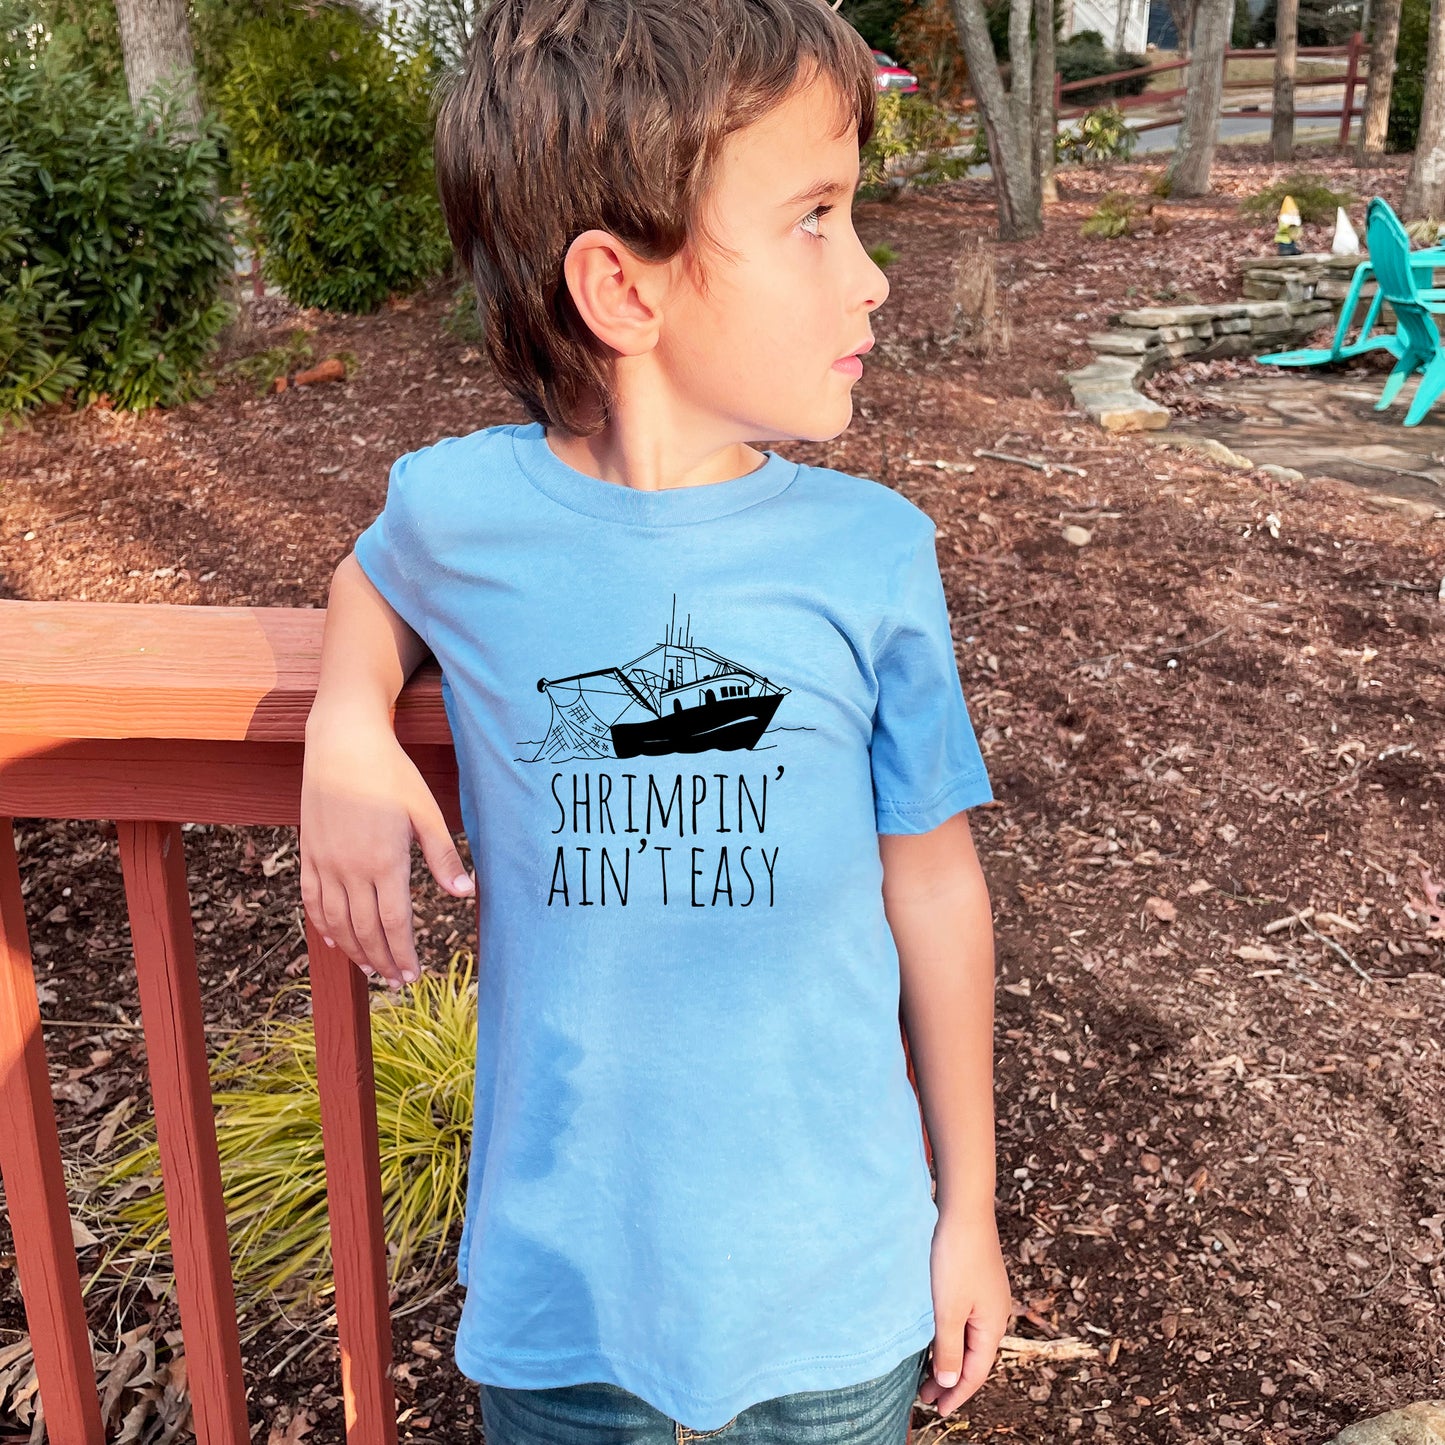 Shrimpin' Ain't Easy - Kid's Tee - Columbia Blue or Lavender